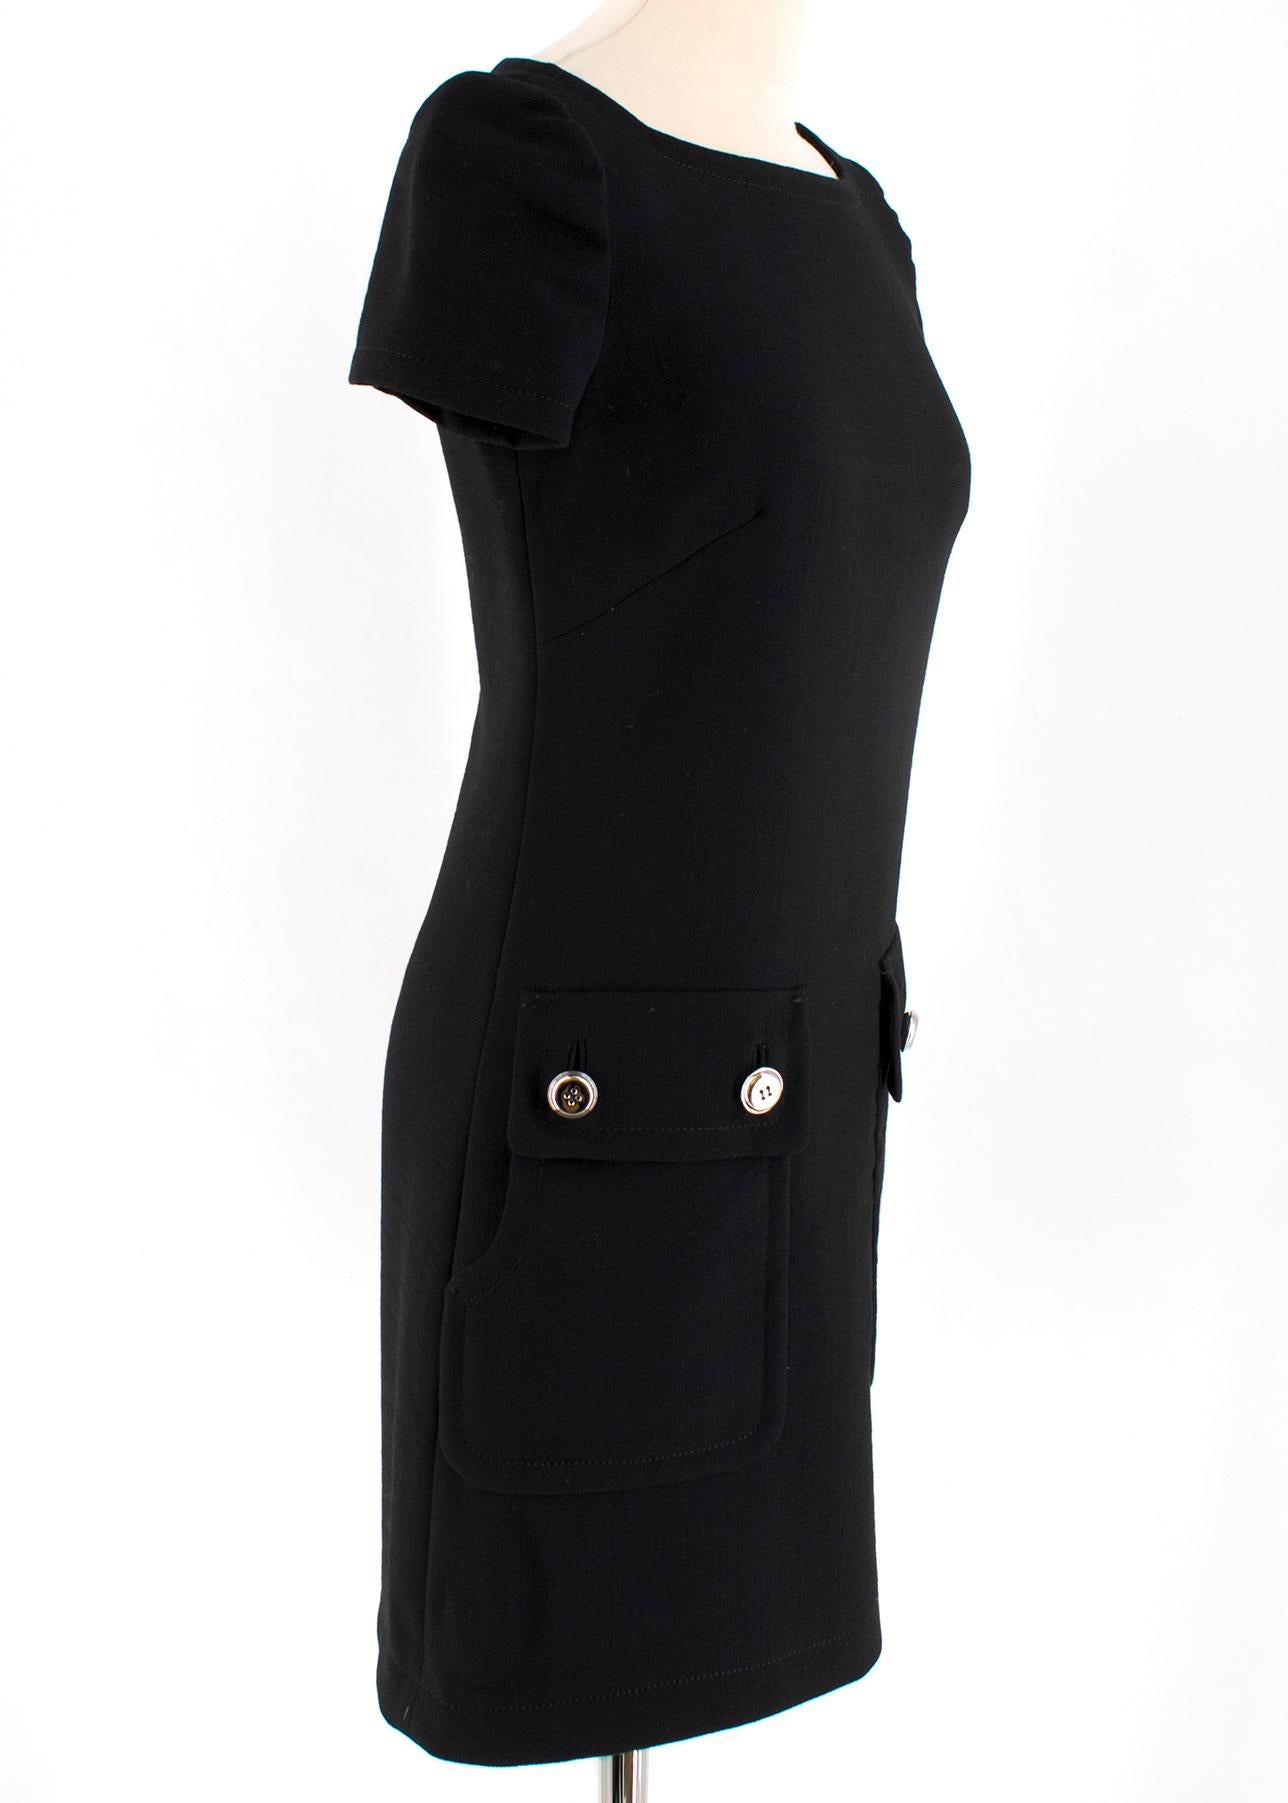 Prada Pocket Detail Wool Black Dress

Dart Stitches at the Bust
Slight Puffed Short Sleeves
Low Front Pockets With Double Silver Buttons
Black Hardware 
Back Zipper
Black Lining


Please note, these items are pre-owned and may show some signs of